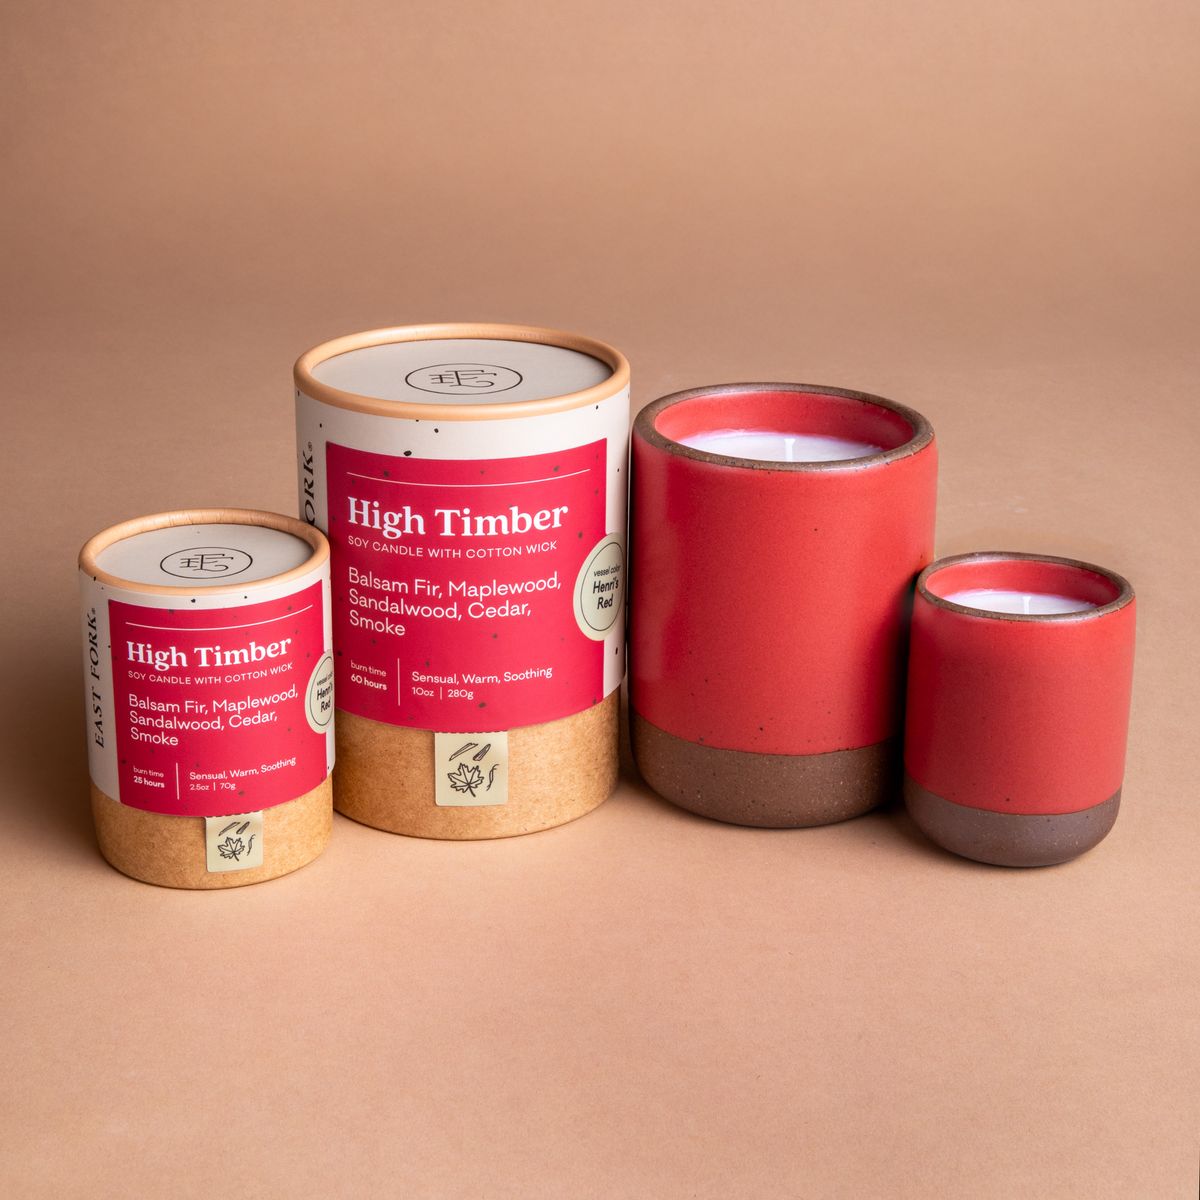 Small and large ceramic vessel next to each other in bold red color with candles inside each. Cardboard tube packaging is on the left with branding stickers that say "High Timber".